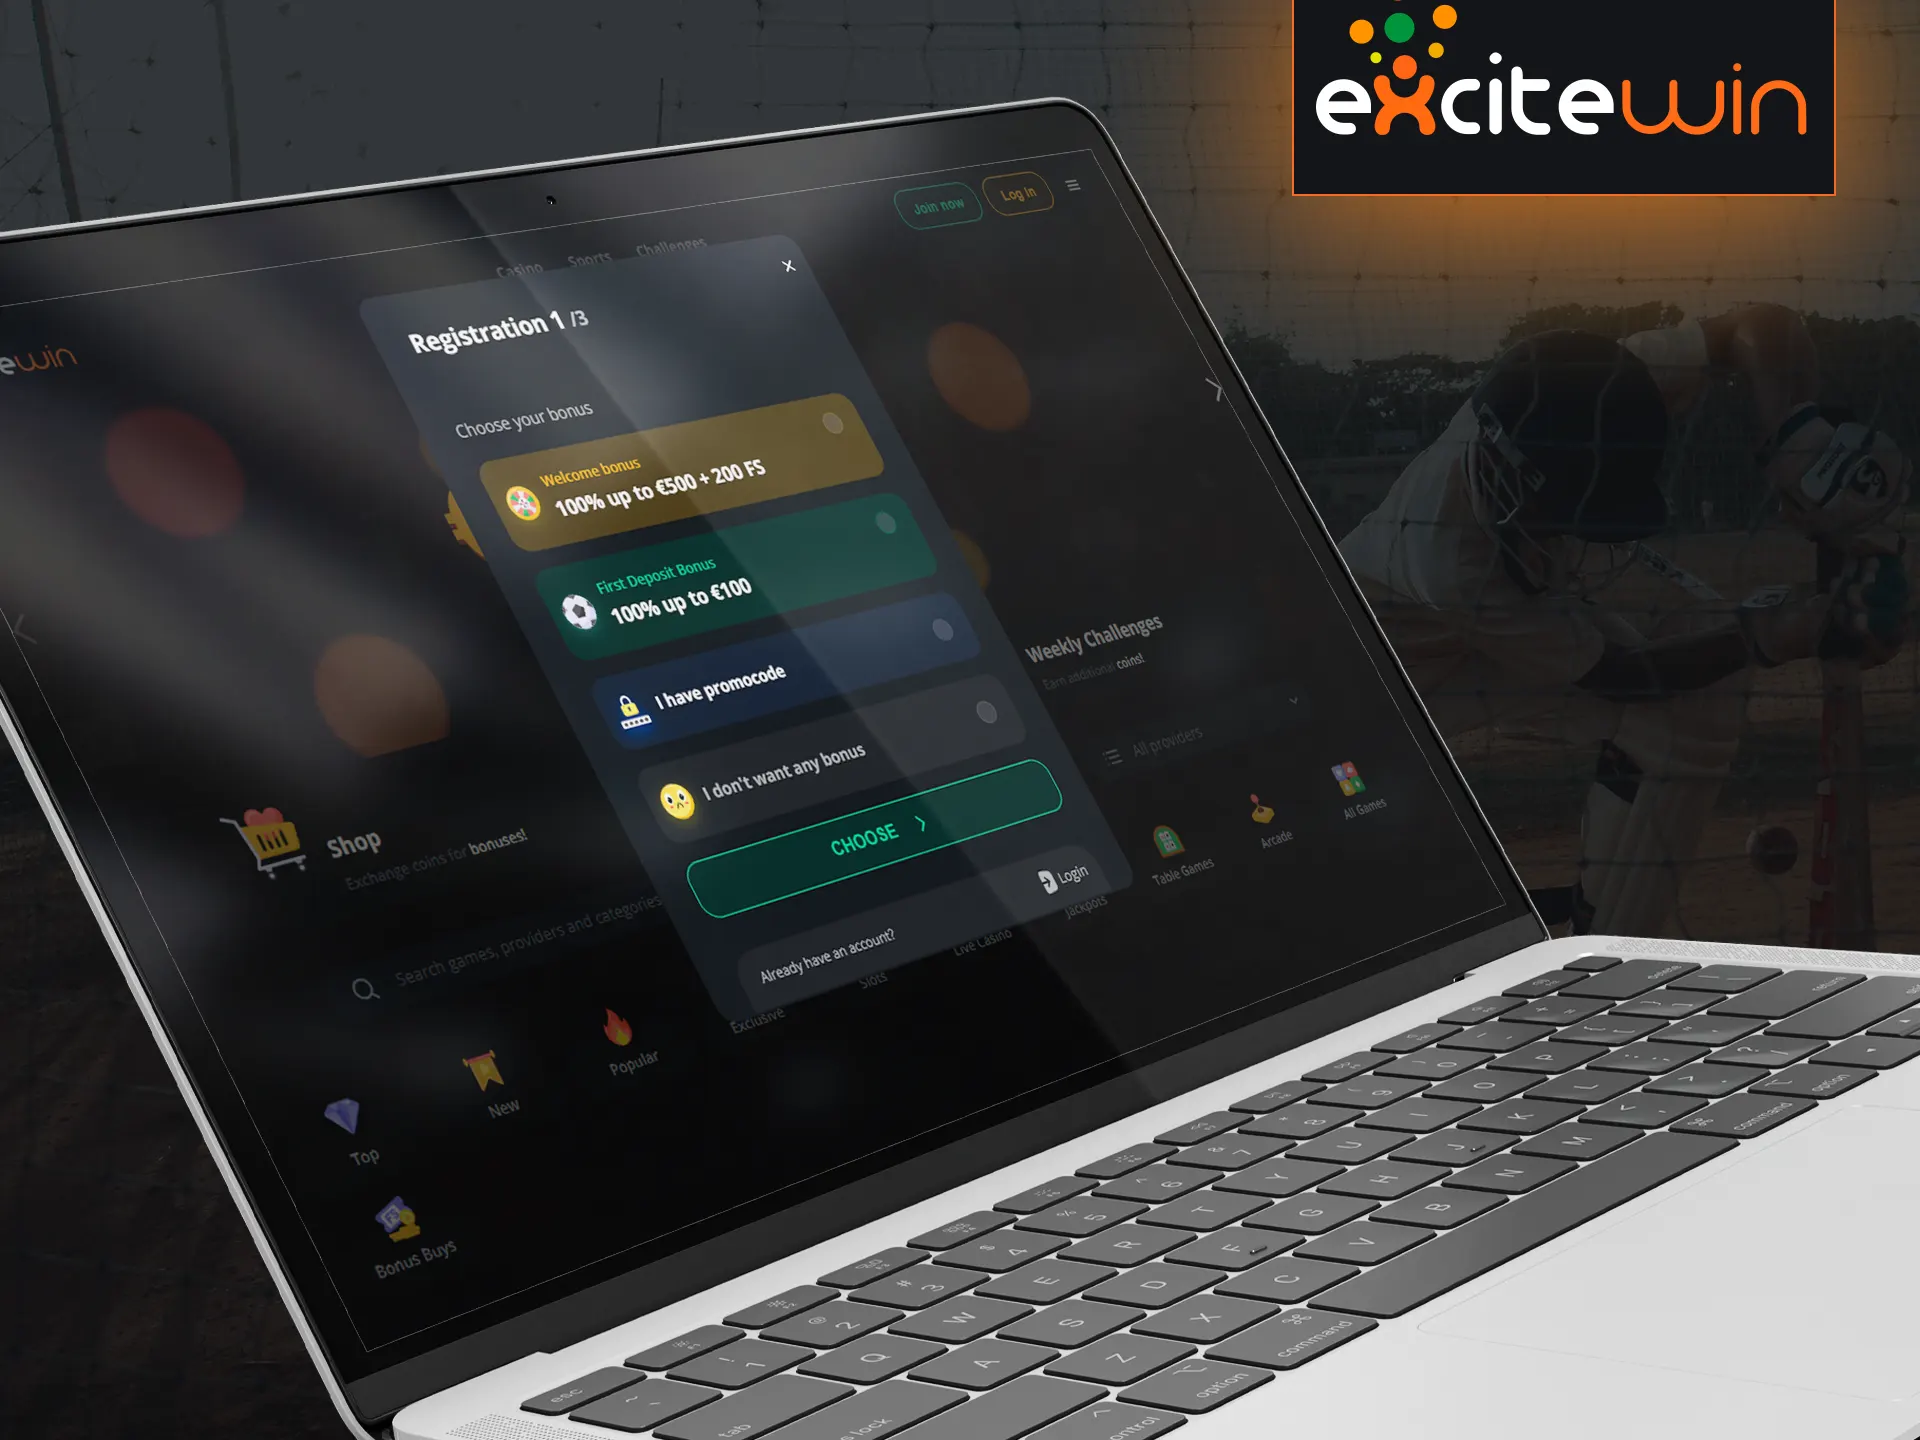 The registration process on Excitewin is easy and simple.